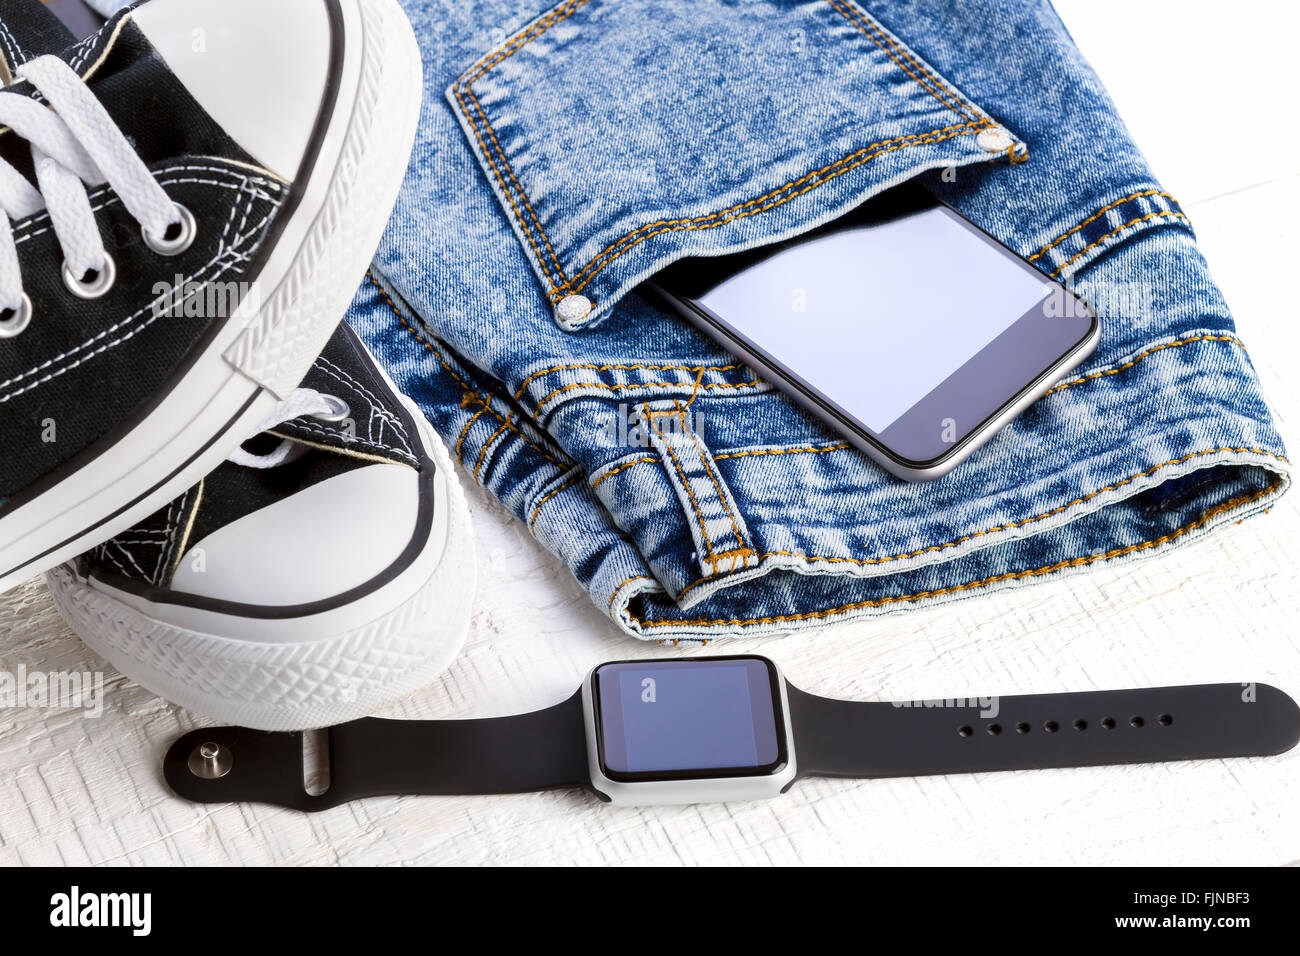 Smartphone, smartwatch, jeans and sport shoes on white wooden boards. Stock Photo